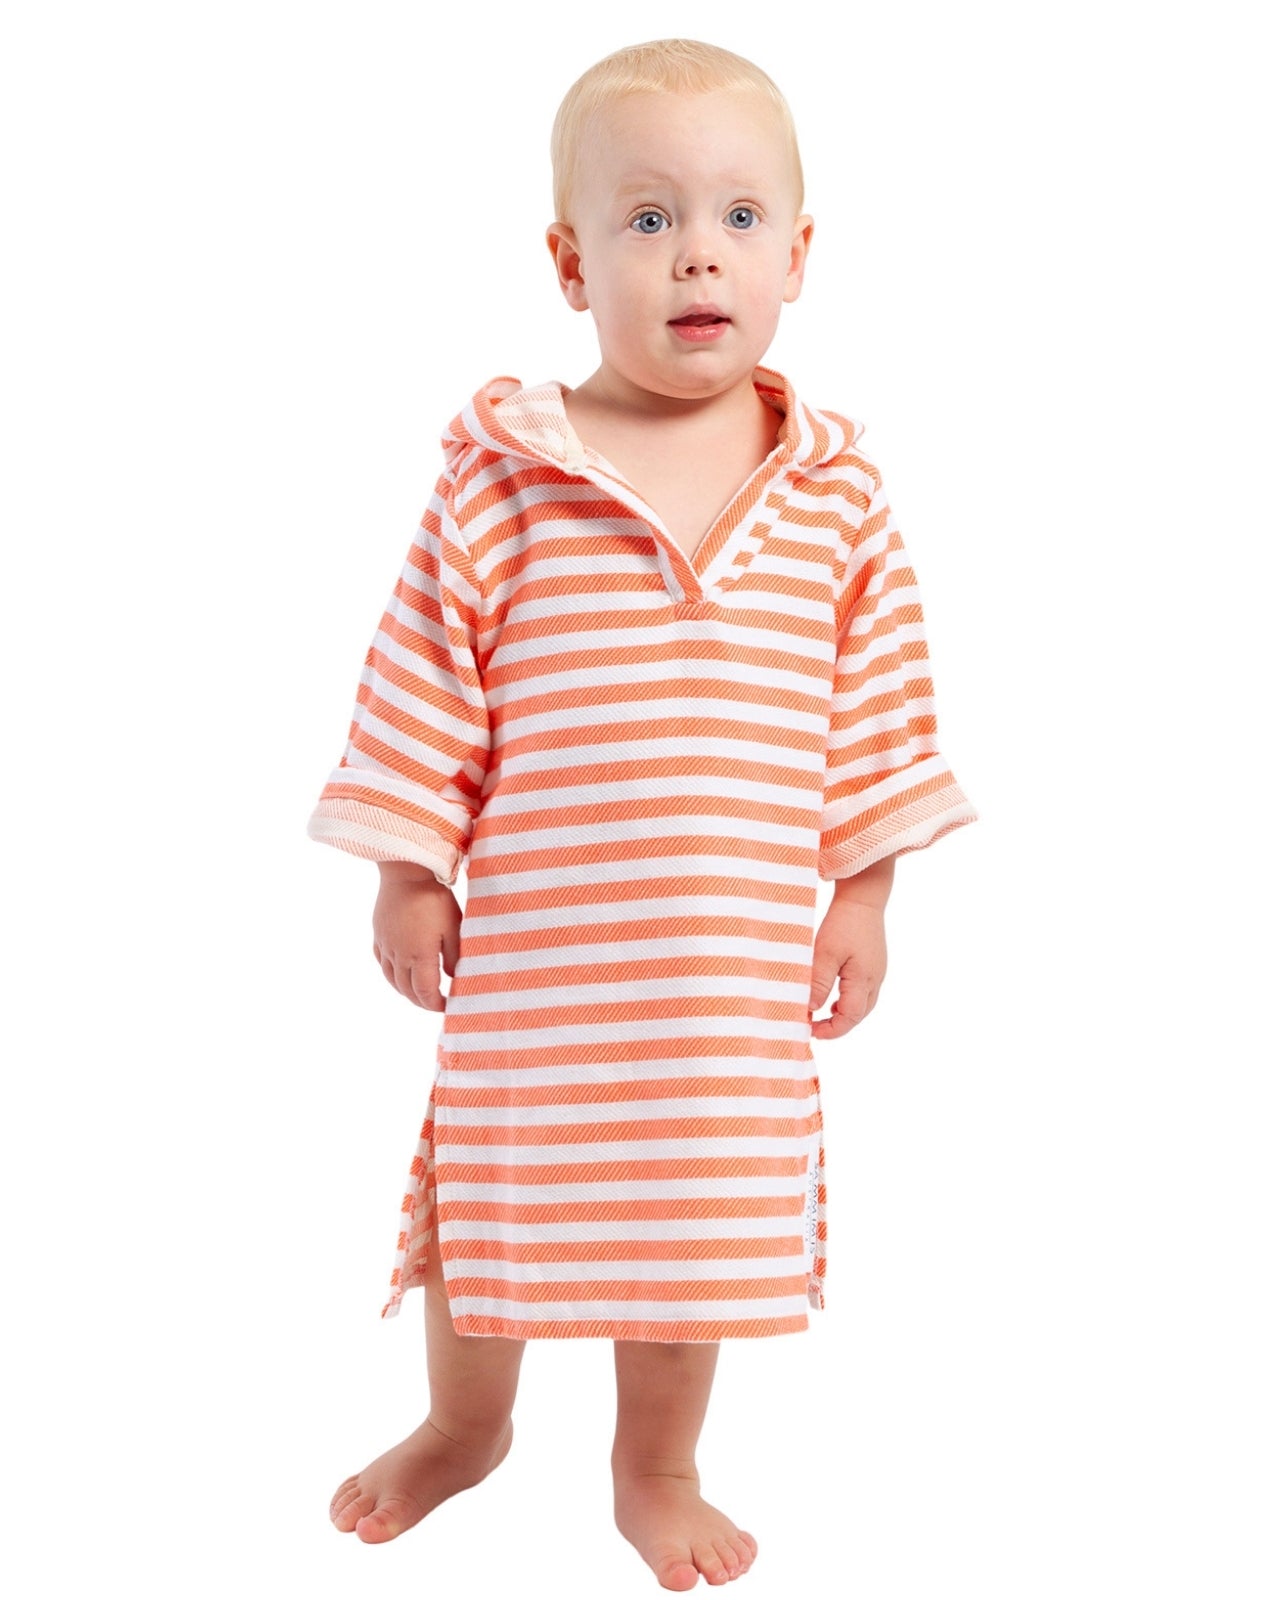 AMALFI Baby Hooded Towel: Coral/White